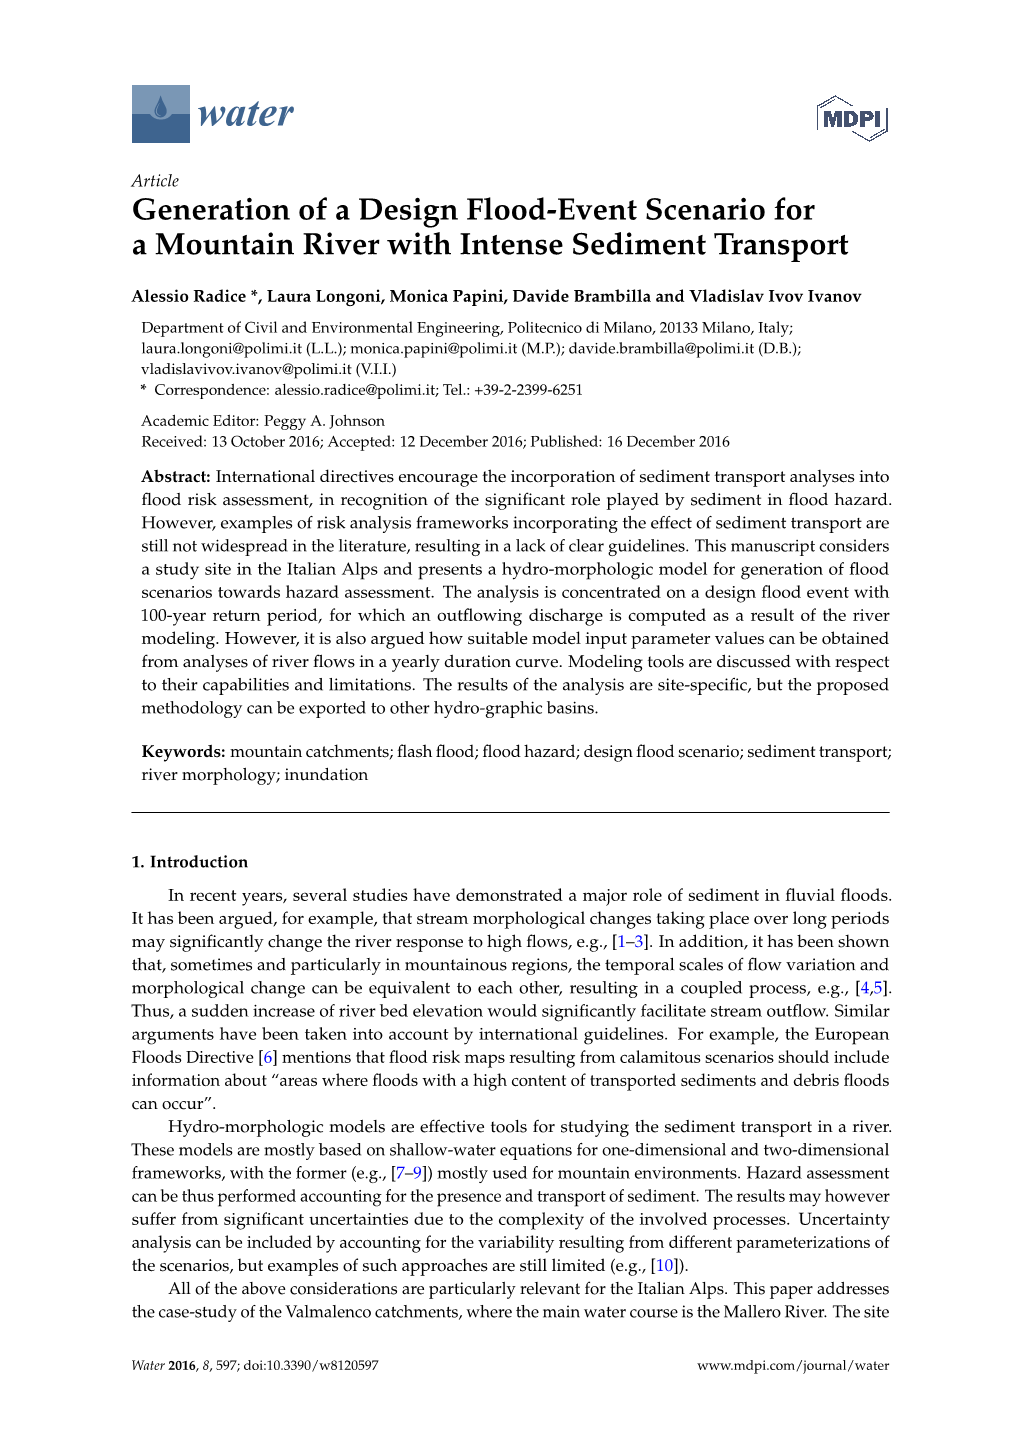 Generation of a Design Flood-Event Scenario for a Mountain River with Intense Sediment Transport